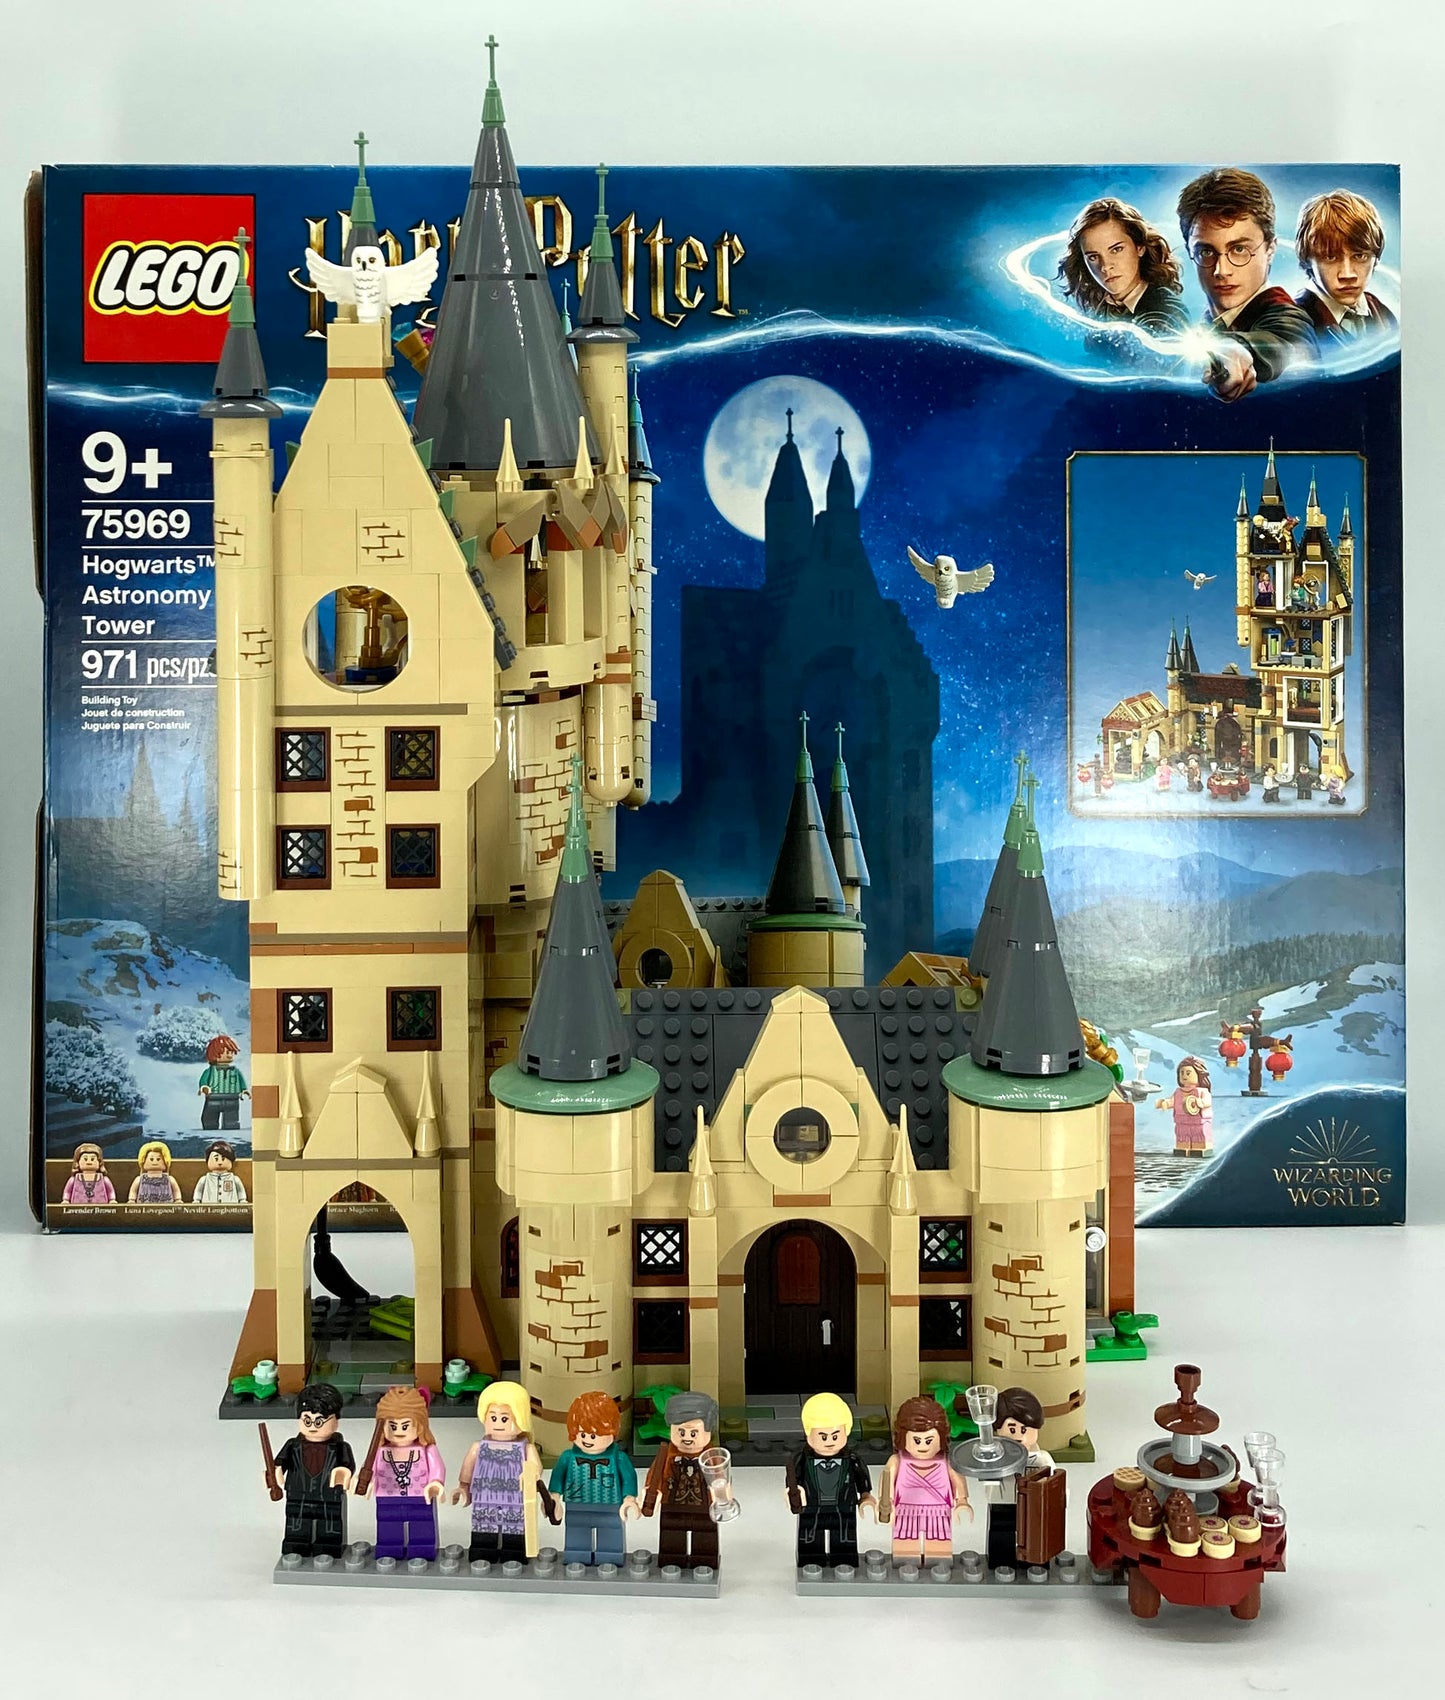 Used Set 75969 Hogwarts Astronomy Tower (with Instruction Manual and Box)